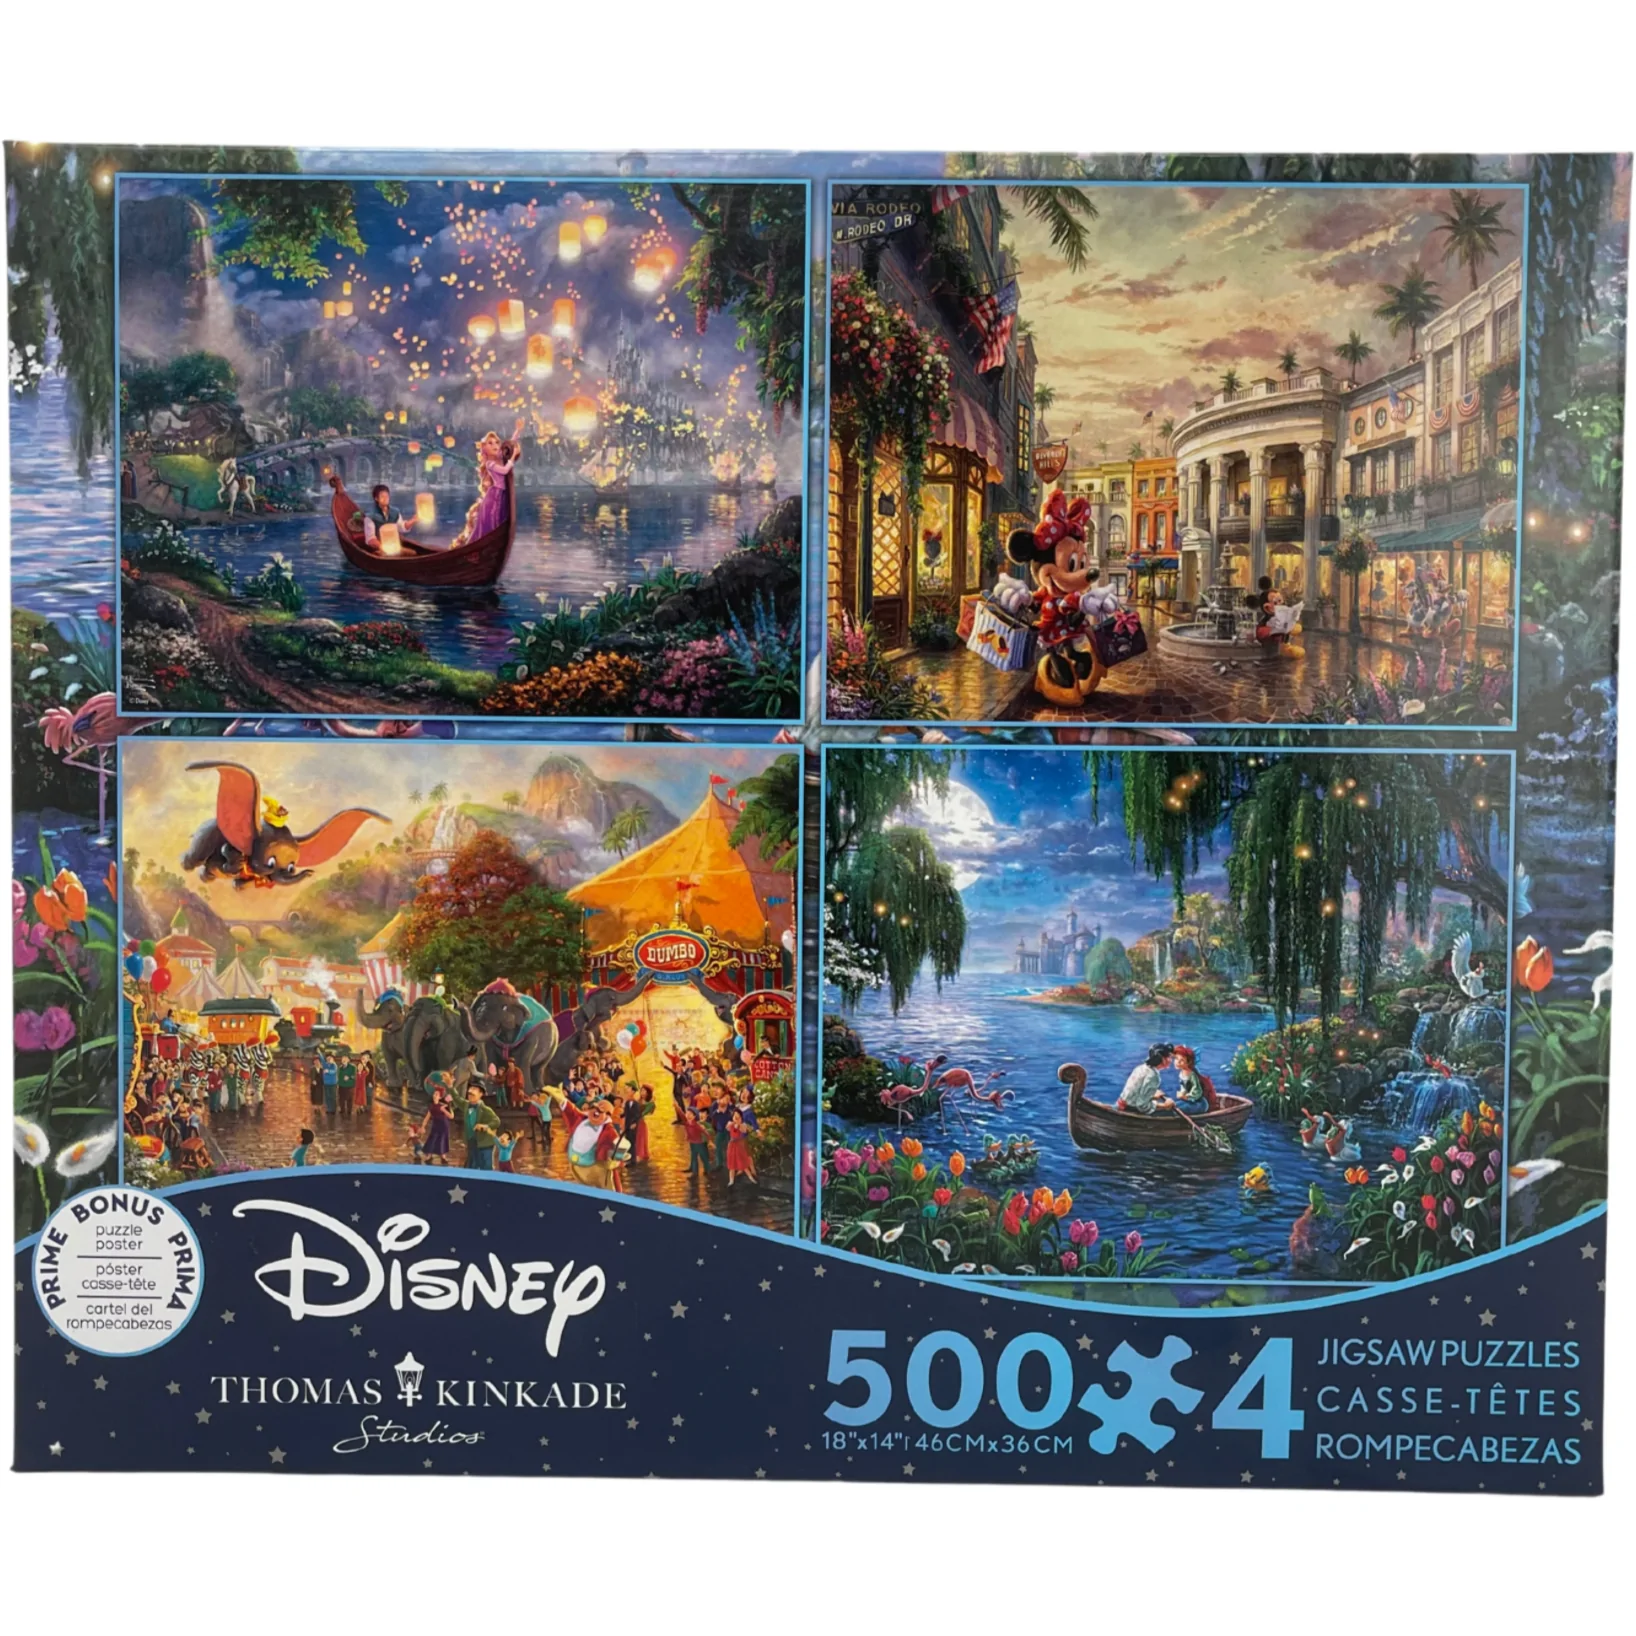 Thomas Kinkade Disney Jigsaw Puzzle / 4 Puzzles with 500 Pieces Each / Disney Movies & Characters